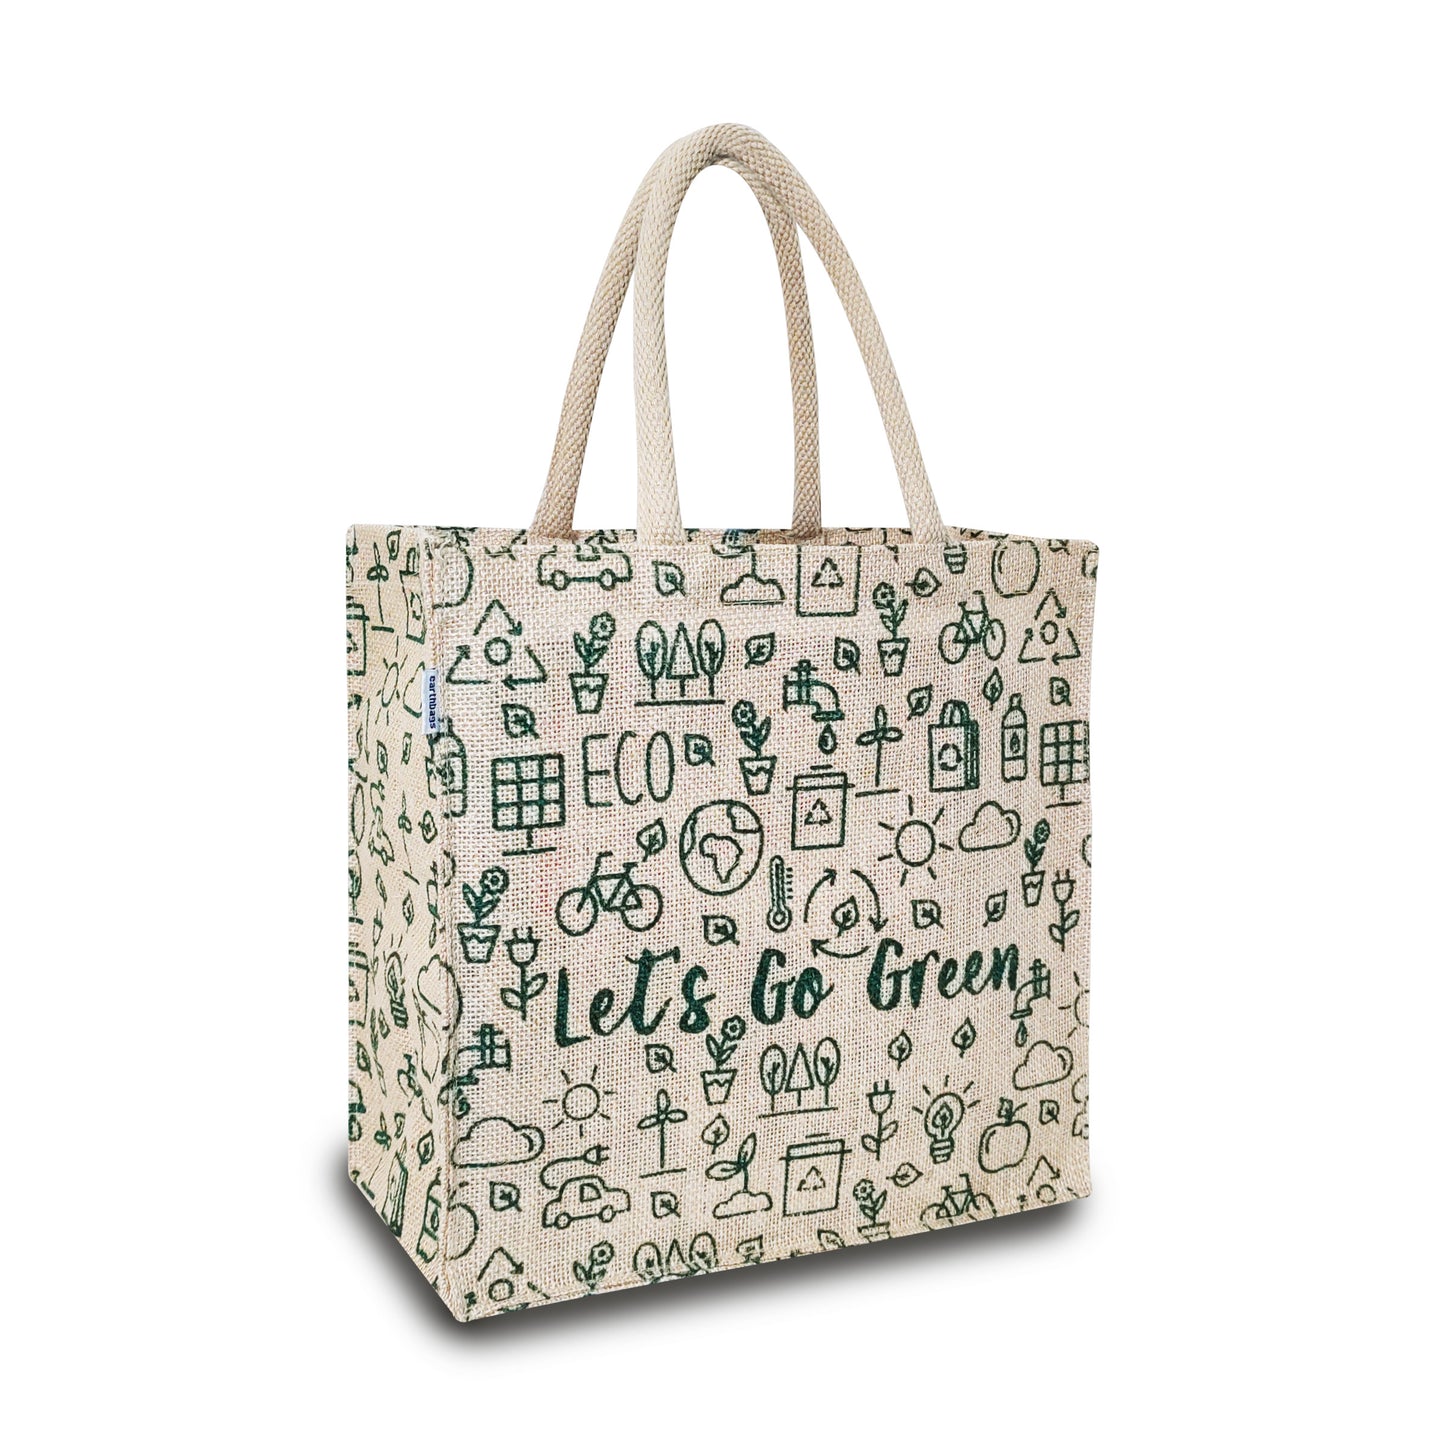 GO GREEN WITH OUR ECO-FRIENDLY JUCO BAG